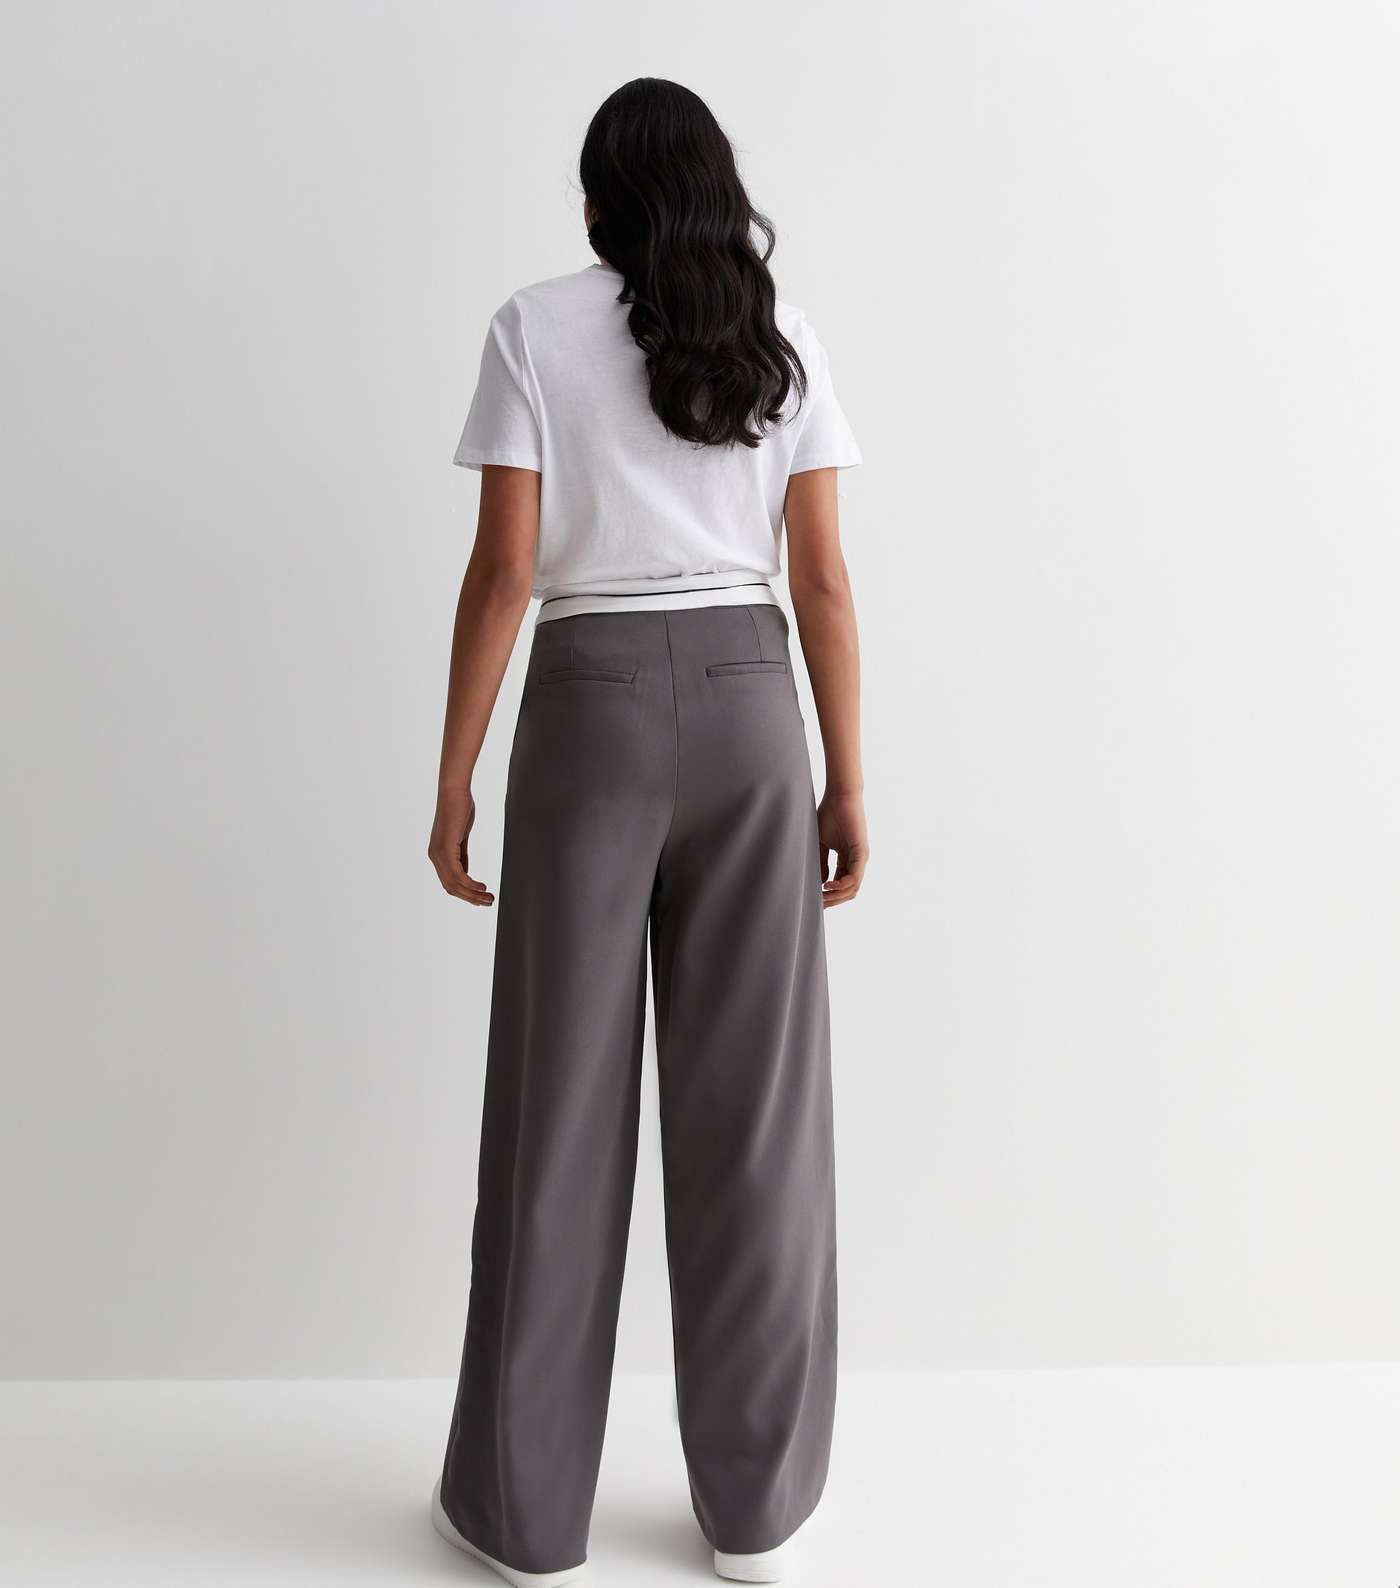 Womens Contrast Waistband Wide Leg Tailored Trousers - Grey - 12, Grey, £14.00